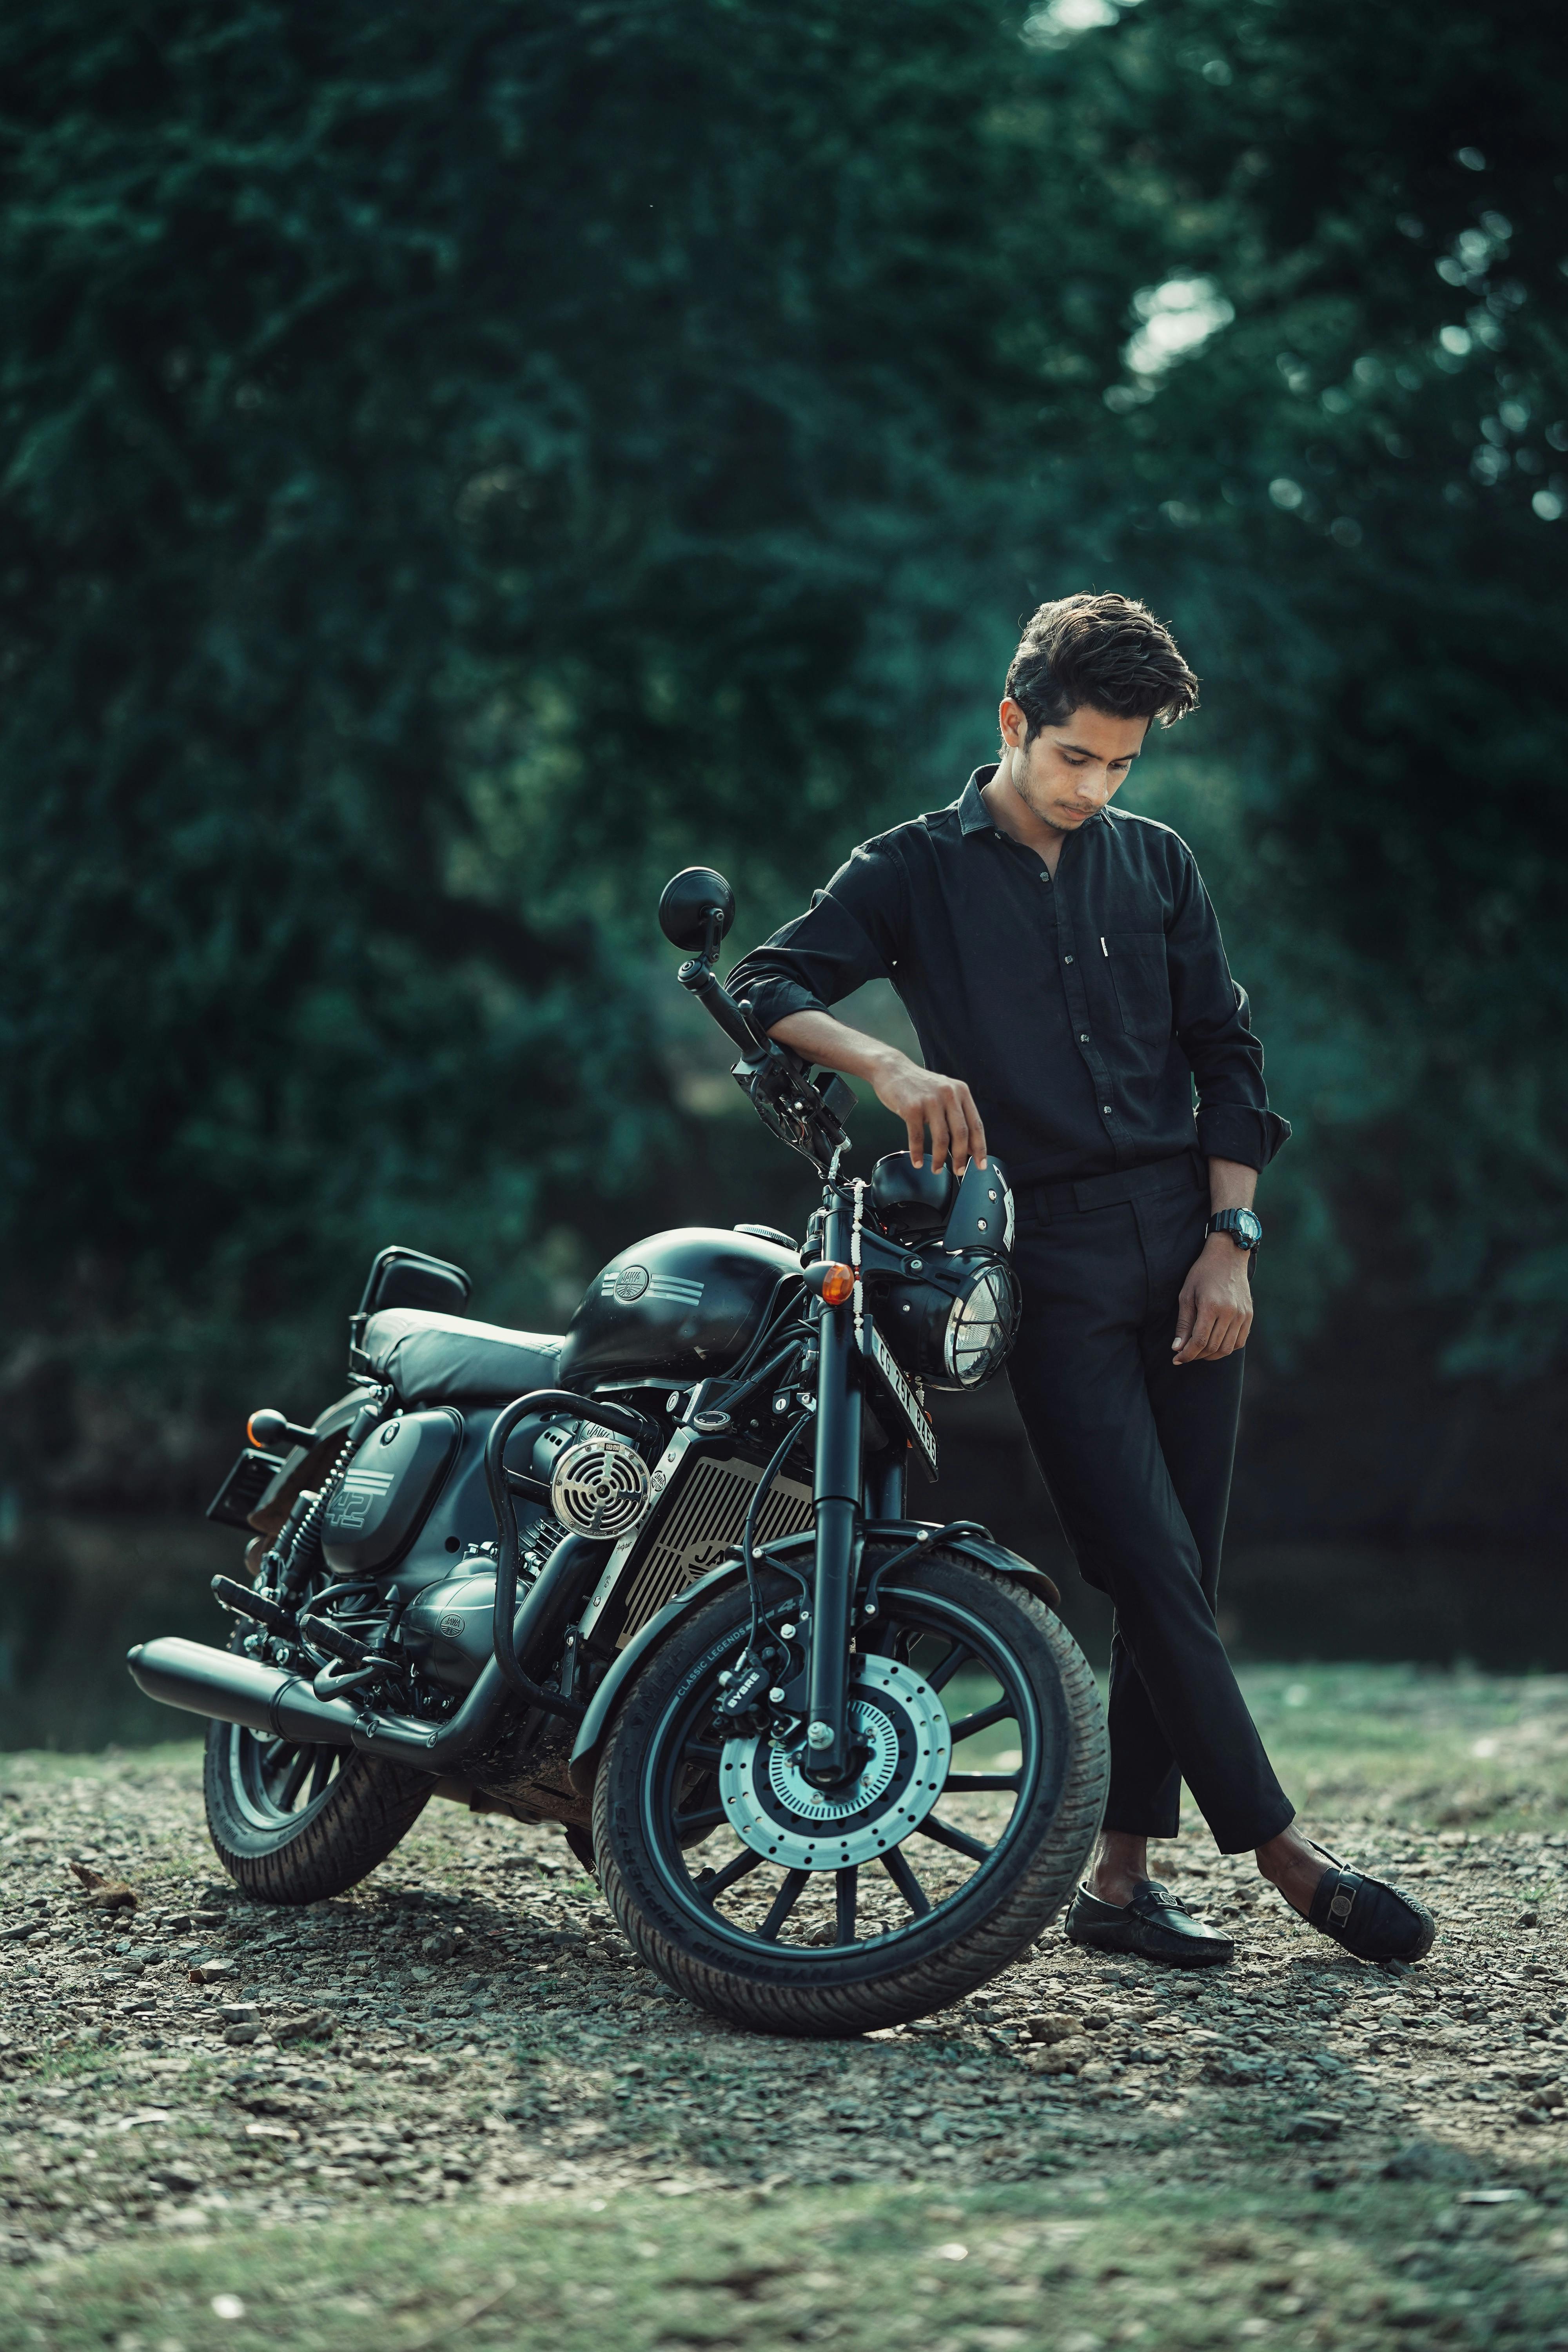 Royal Enfield Photoshoot Poses For Boys l Photoshoot With Bullet Bikes/  StyleBike Pose#ROYALENFIELD - YouTube